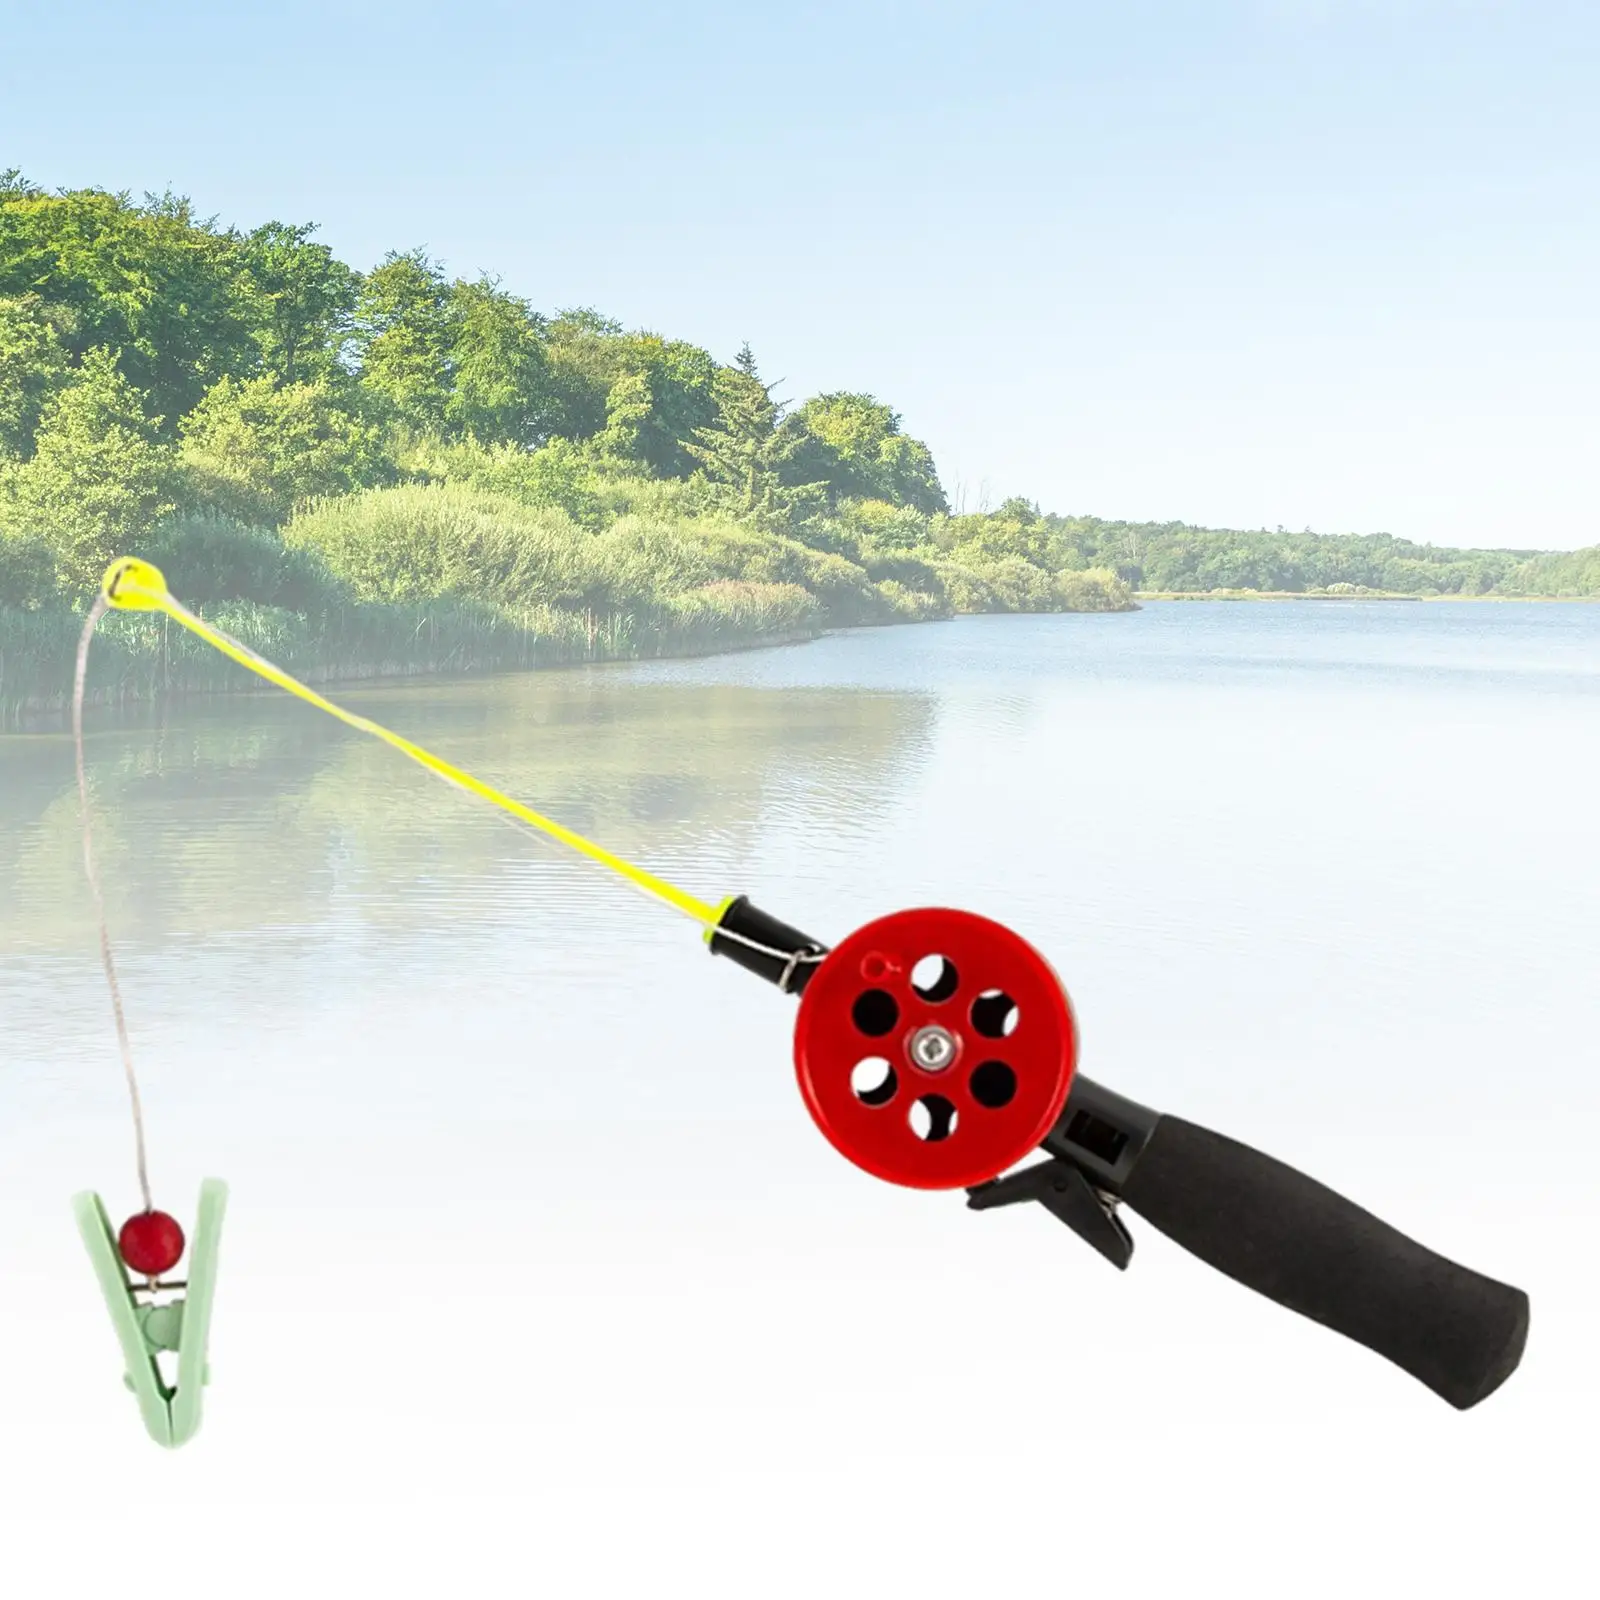 Short Ice Fishing Rod Winter Study Miniature Section Kid Fishing Rod Toy for Shrimp Catching Sea Fishing Holiday Outdoor Camping